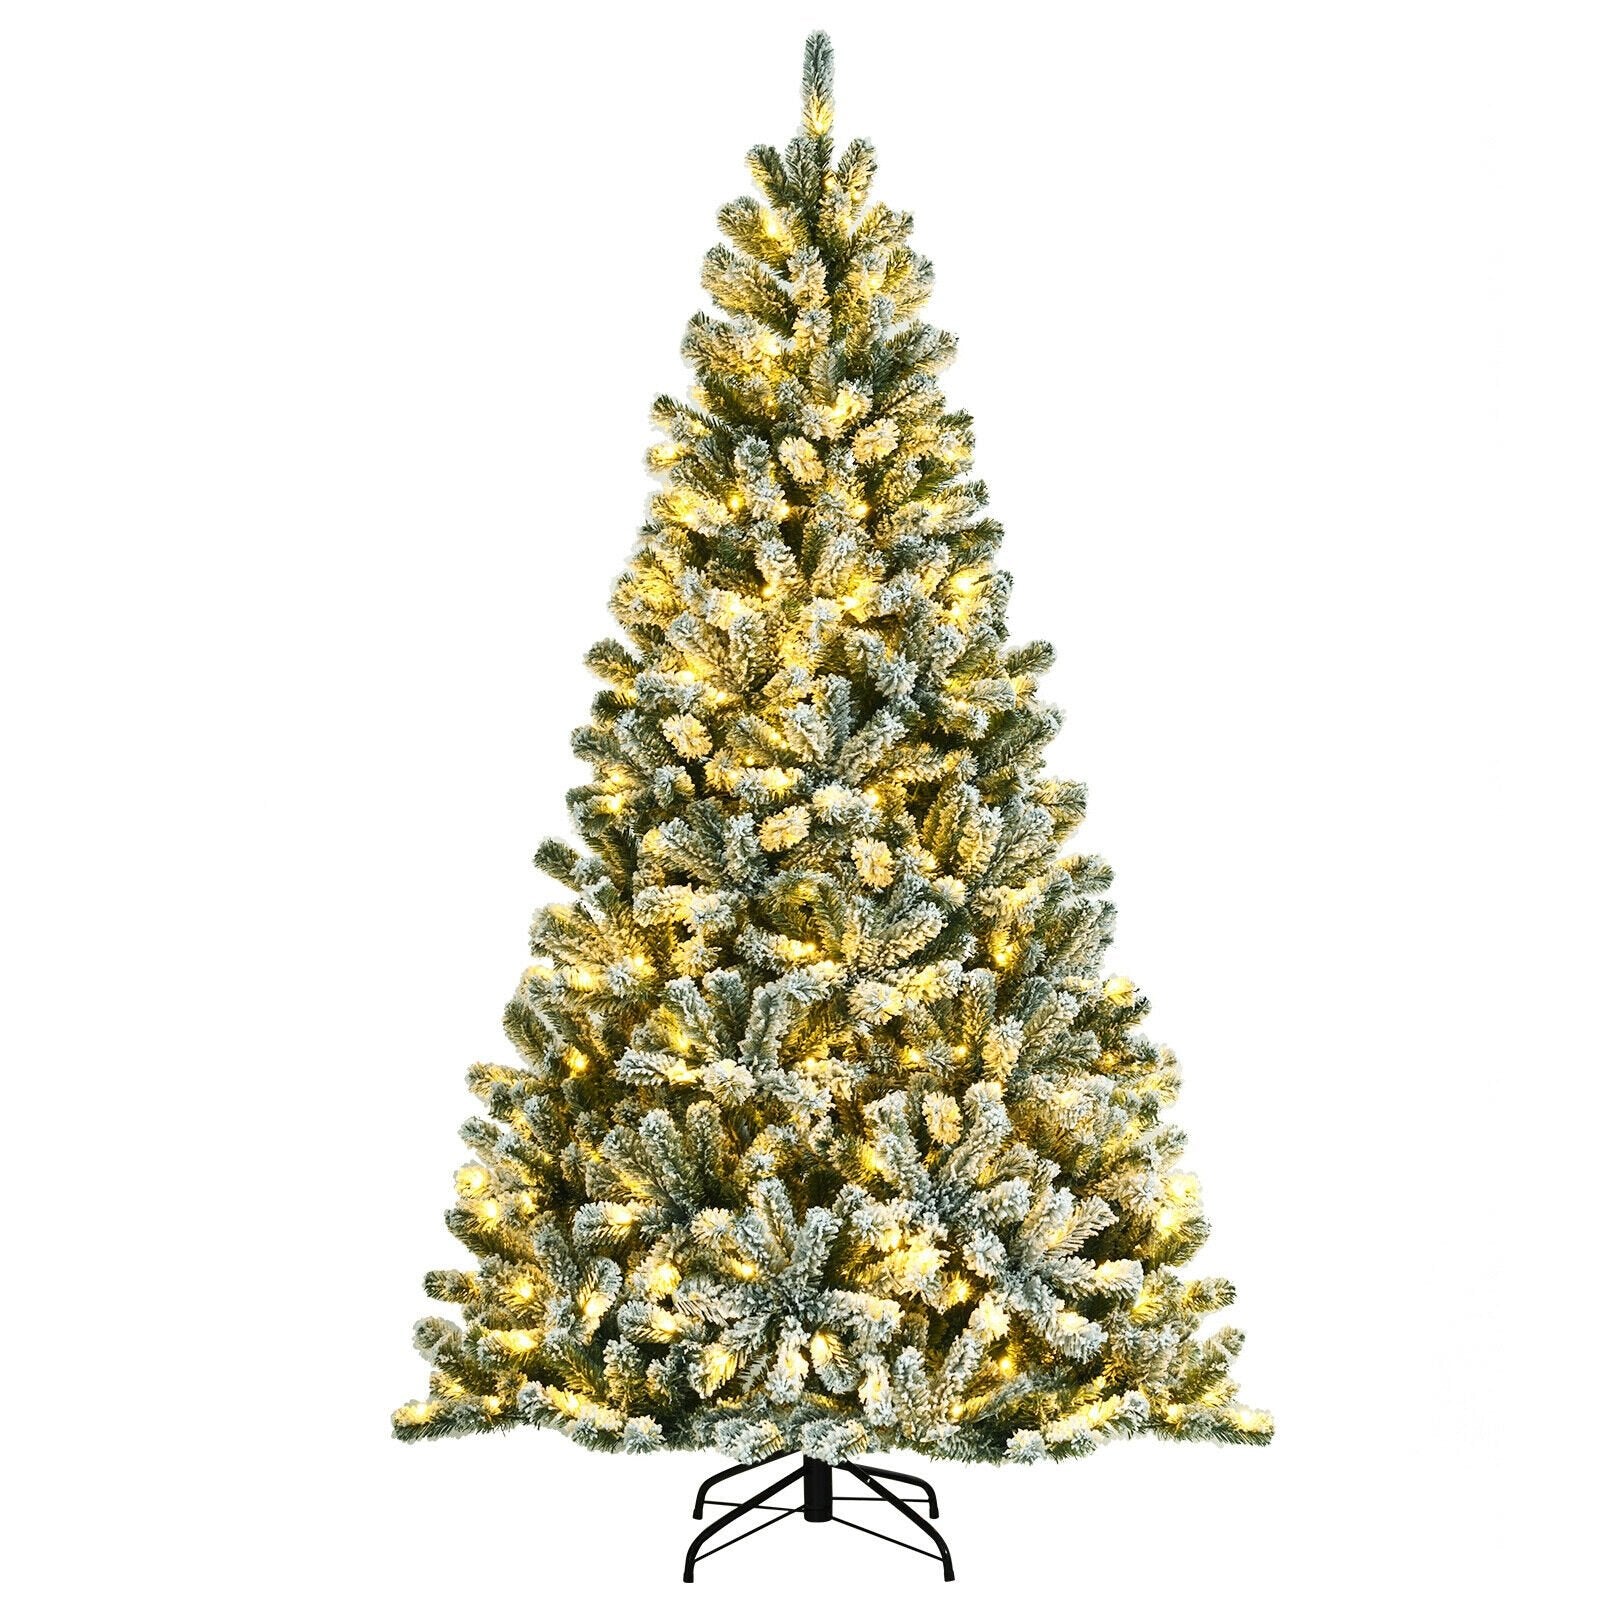 7 Feet Pre-lit Snow Flocked Hinged Christmas Tree with 1116 Tips and Metal Stand-Boyel Living